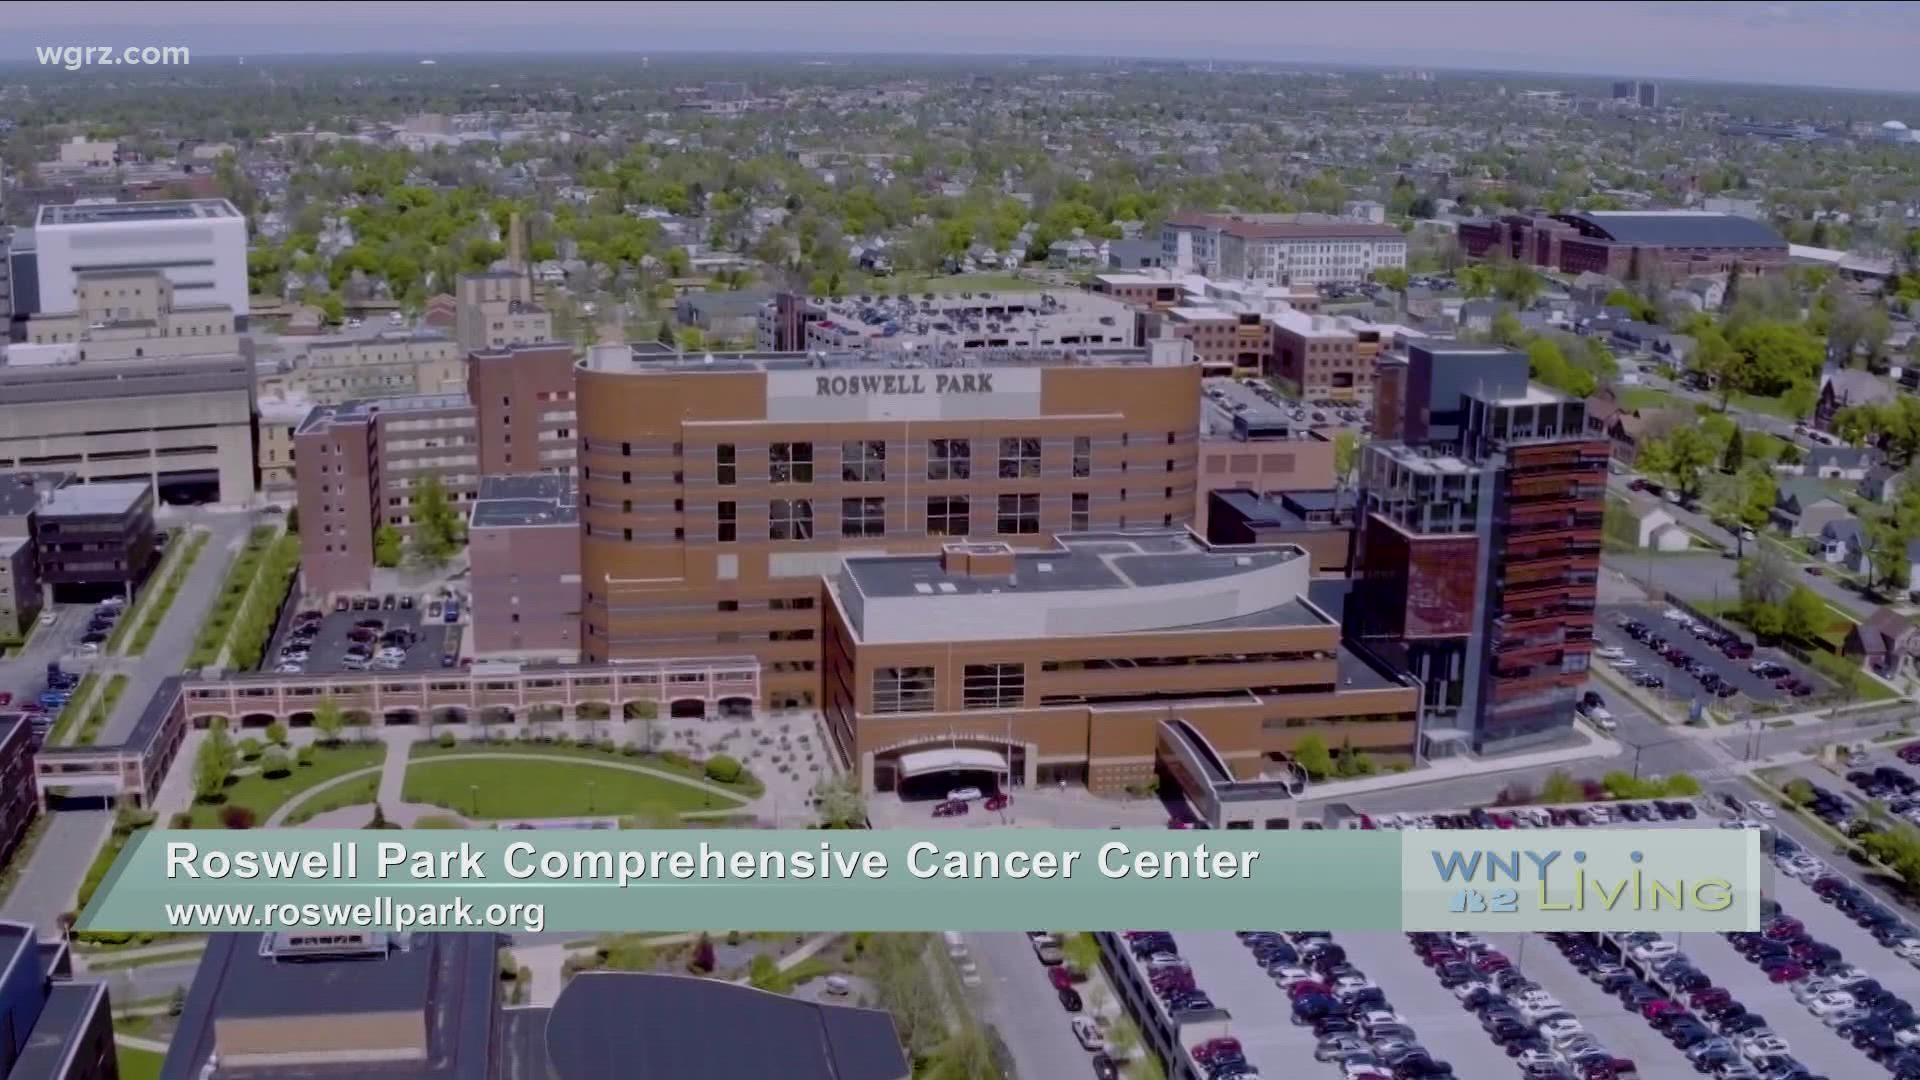 WNY Living - October 9 - Roswell Park Comprehensive Cancer Center (THIS VIDEO IS SPONSORED BY ROSWELL PARK COMPREHENSIVE CANCER CENTER)